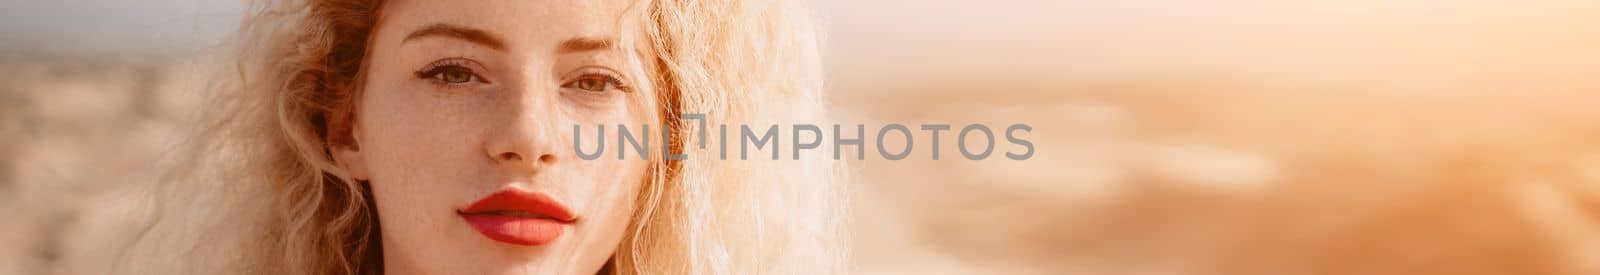 Women's eyes banner. Close up portrait of curly redhead young caucasian woman with freckles at sunset time. Cute woman portrait. by panophotograph